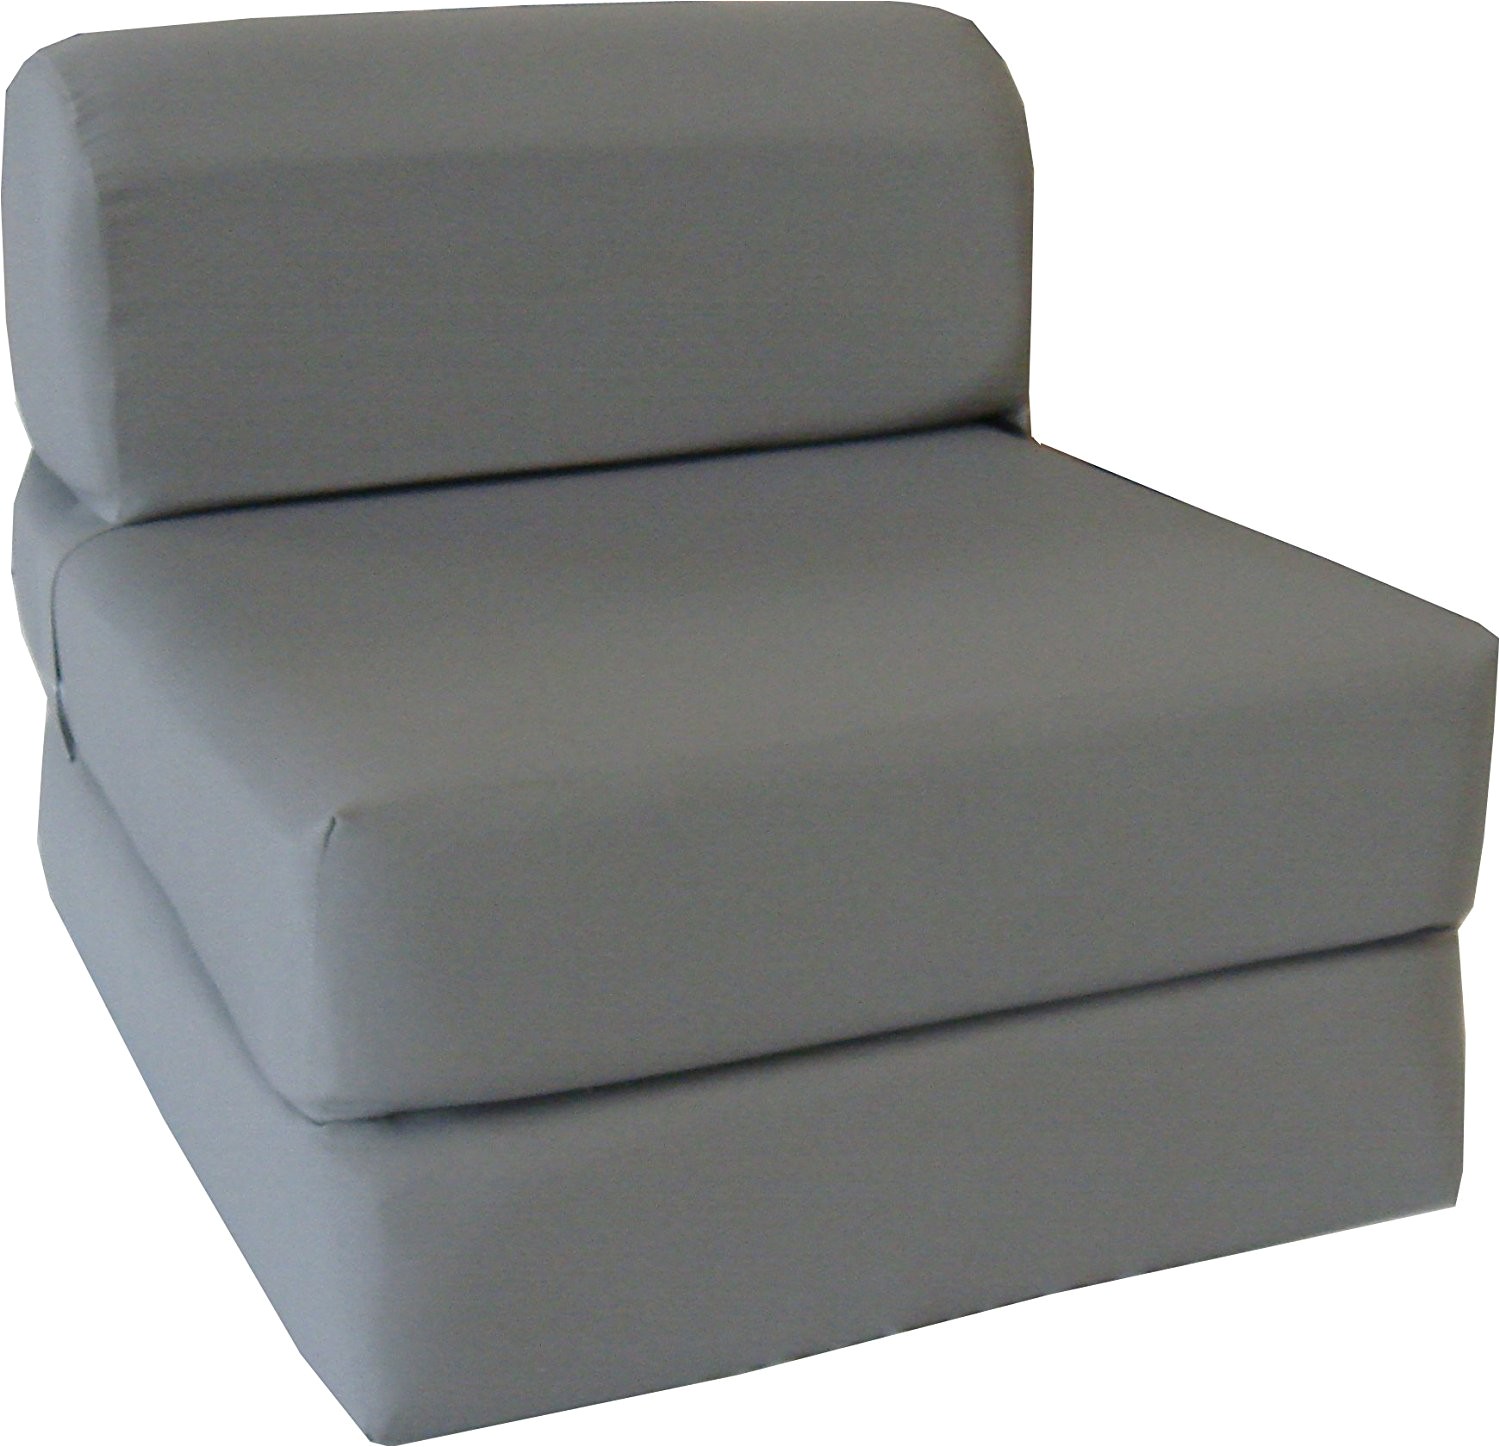 Chairs that Turn Into Beds Amazon Com Gray Sleeper Chair Folding Foam Bed Sized 6 Thick X 32